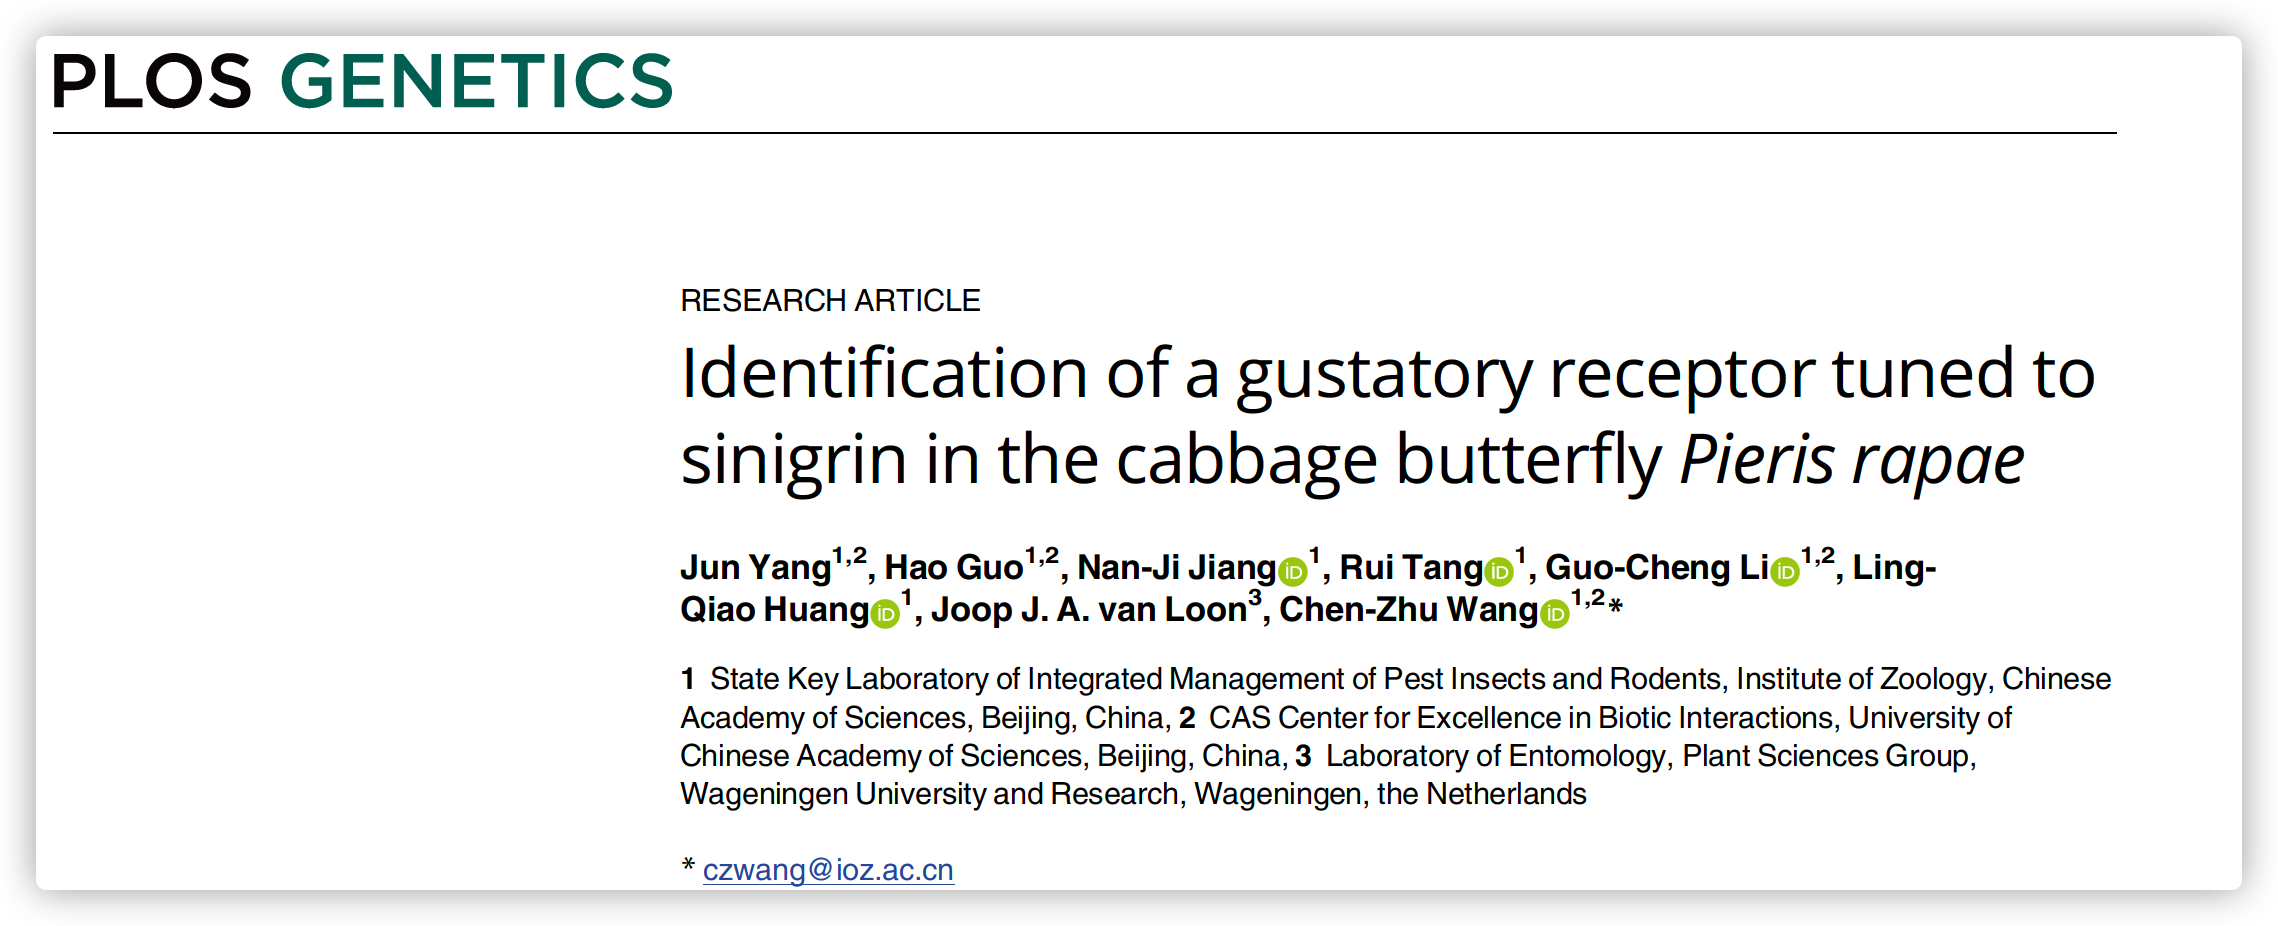 Identification of a gustatory receptor tuned to sinigrin in the cabbage butterfly Pieris rapae